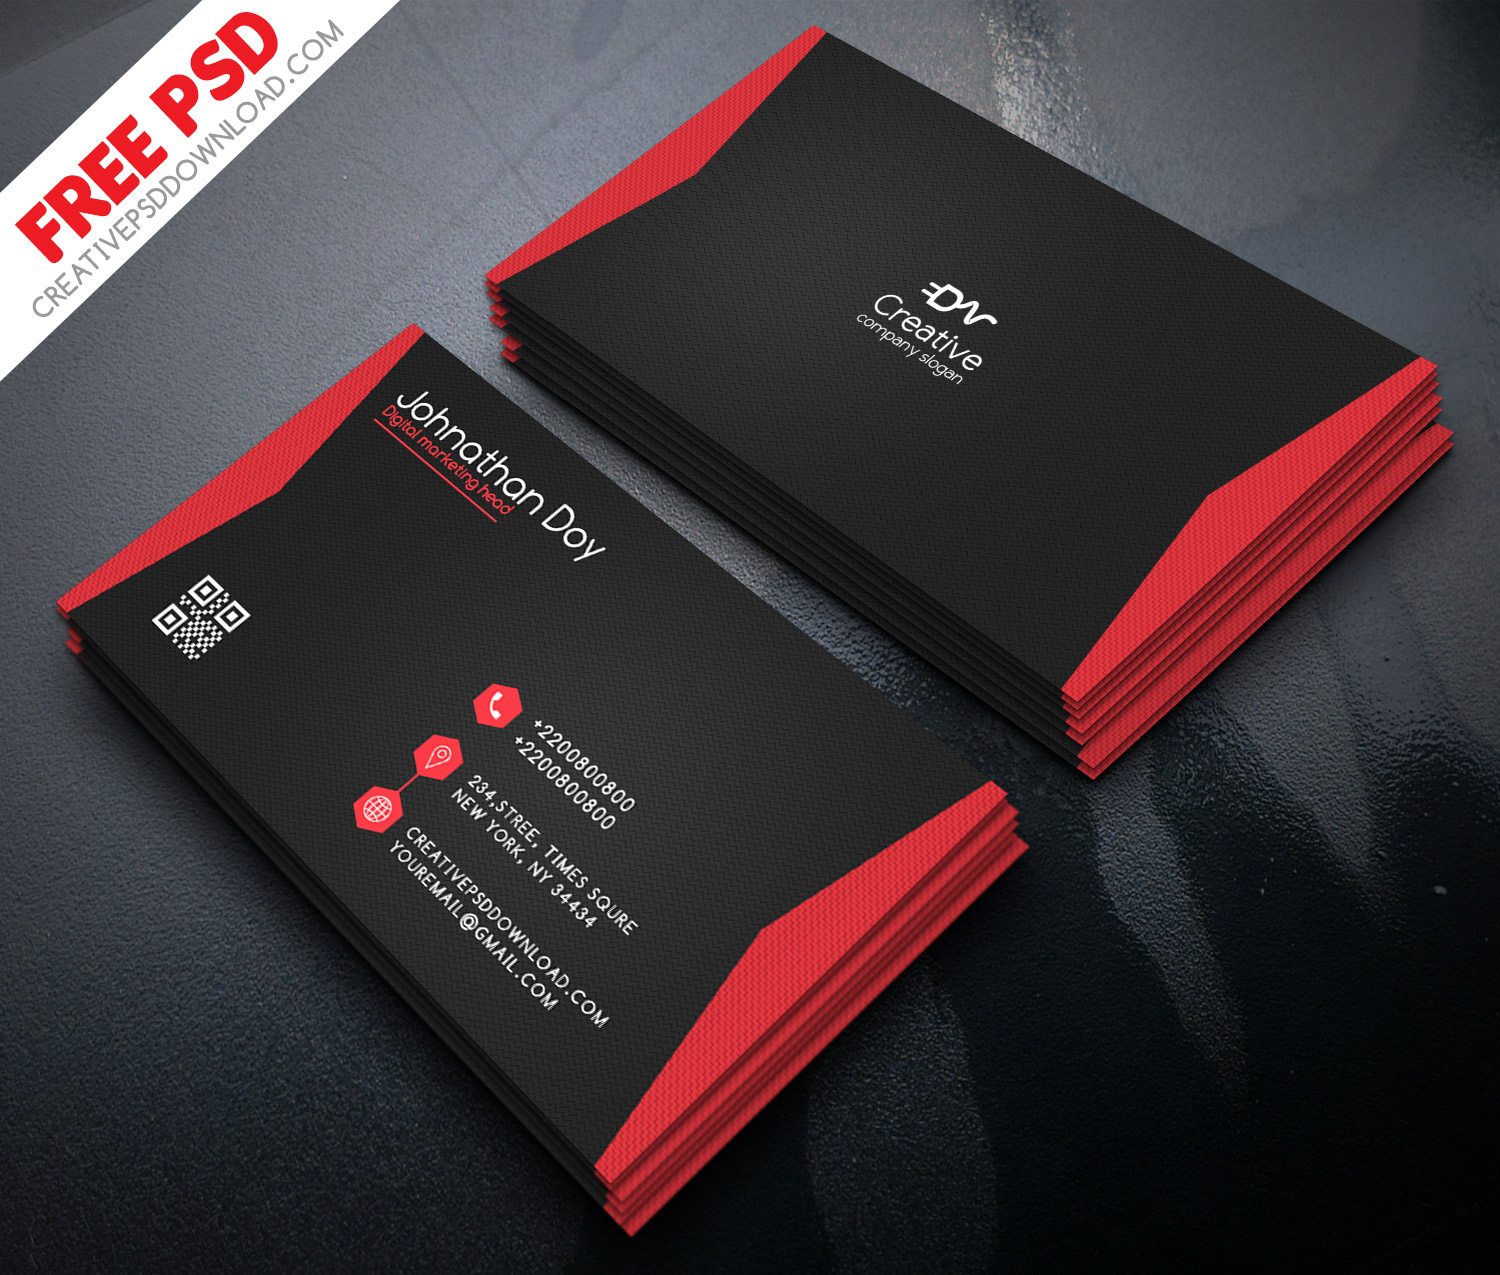 Business Card PSD Mockup Download for Free - DesignHooks For Free Business Card Templates In Psd Format